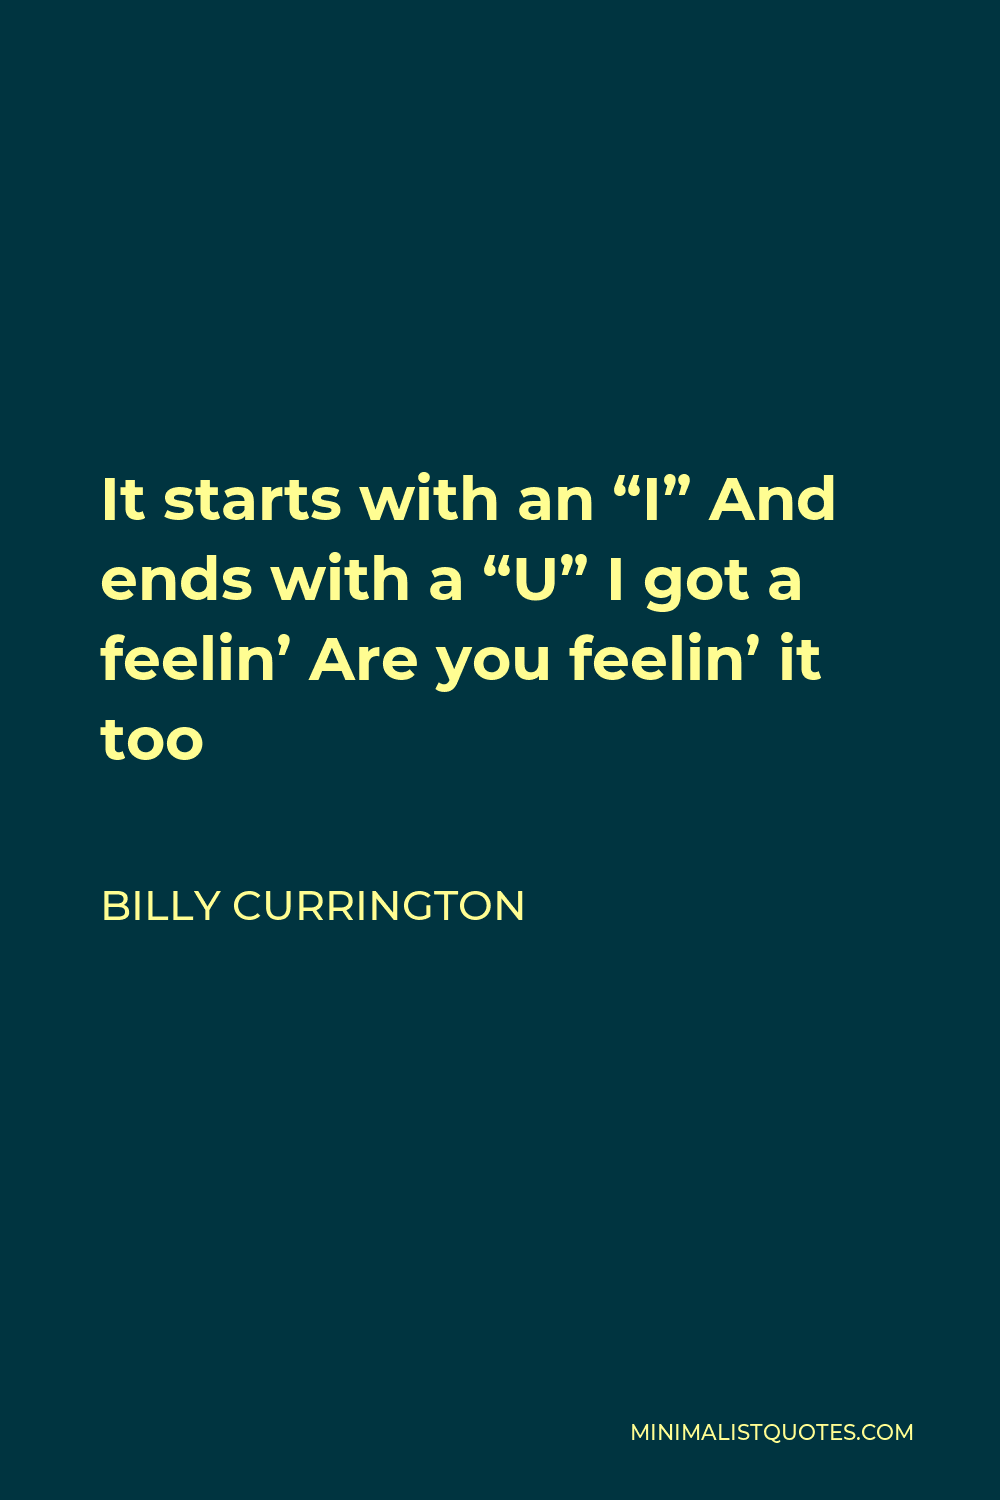 Billy Currington Quote - It starts with an “I” And ends with a “U” I got a feelin’ Are you feelin’ it too